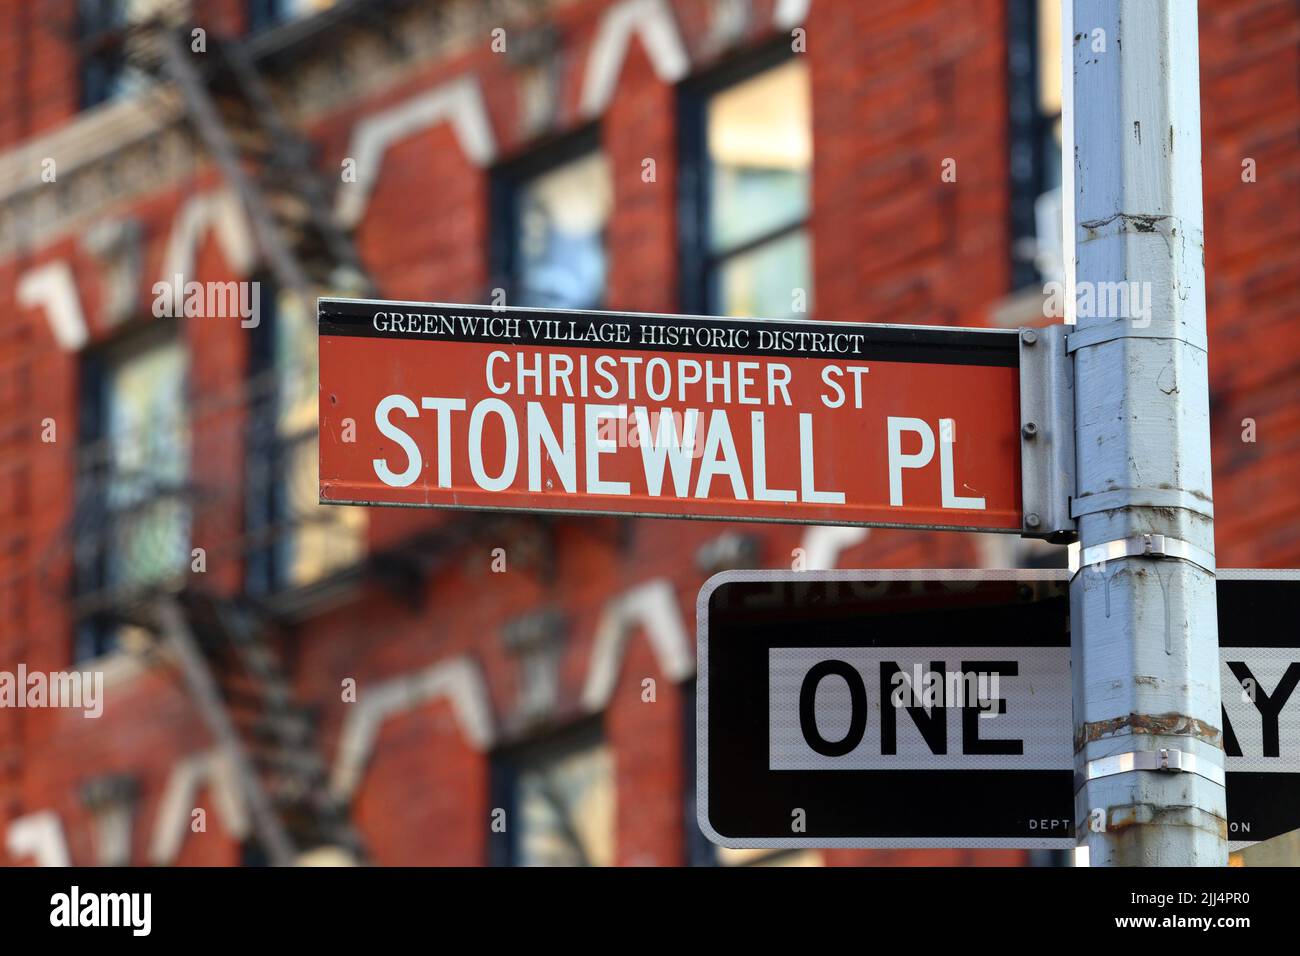 Christopher Street, Stonewall Place segnaletica stradale in Greenwich Village Historic District a Manhattan, New York. Christopher St, Stonewall Pl. Foto Stock